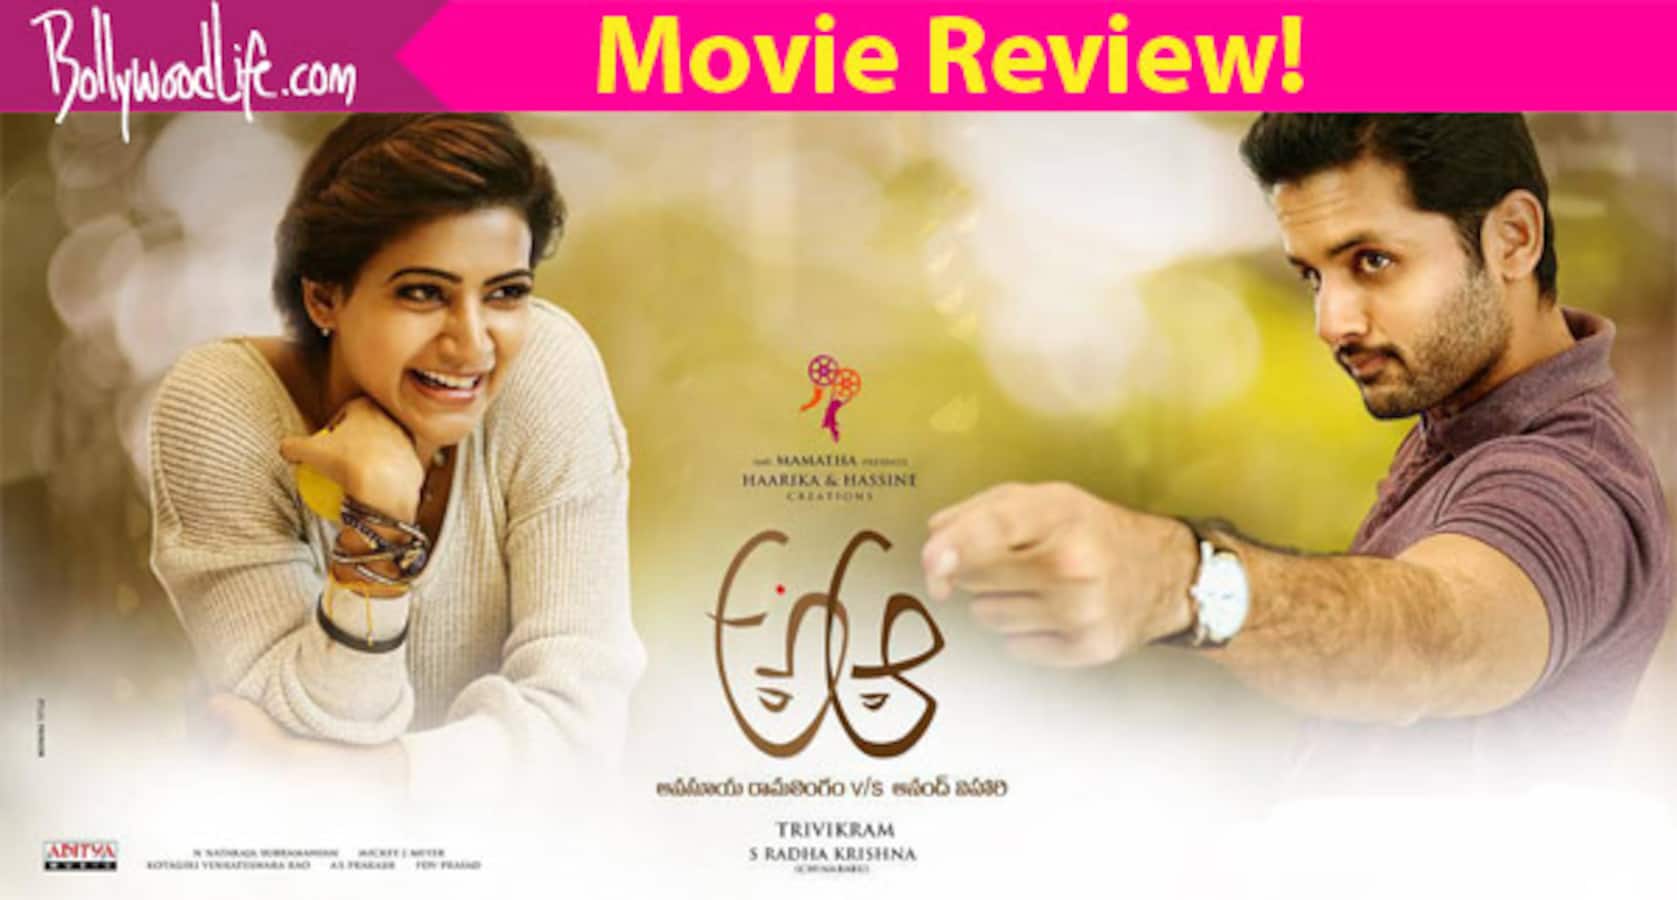 A Aa movie review: Samantha Ruth Prabhu's funny antics makes this romantic comedy a delightful watch!